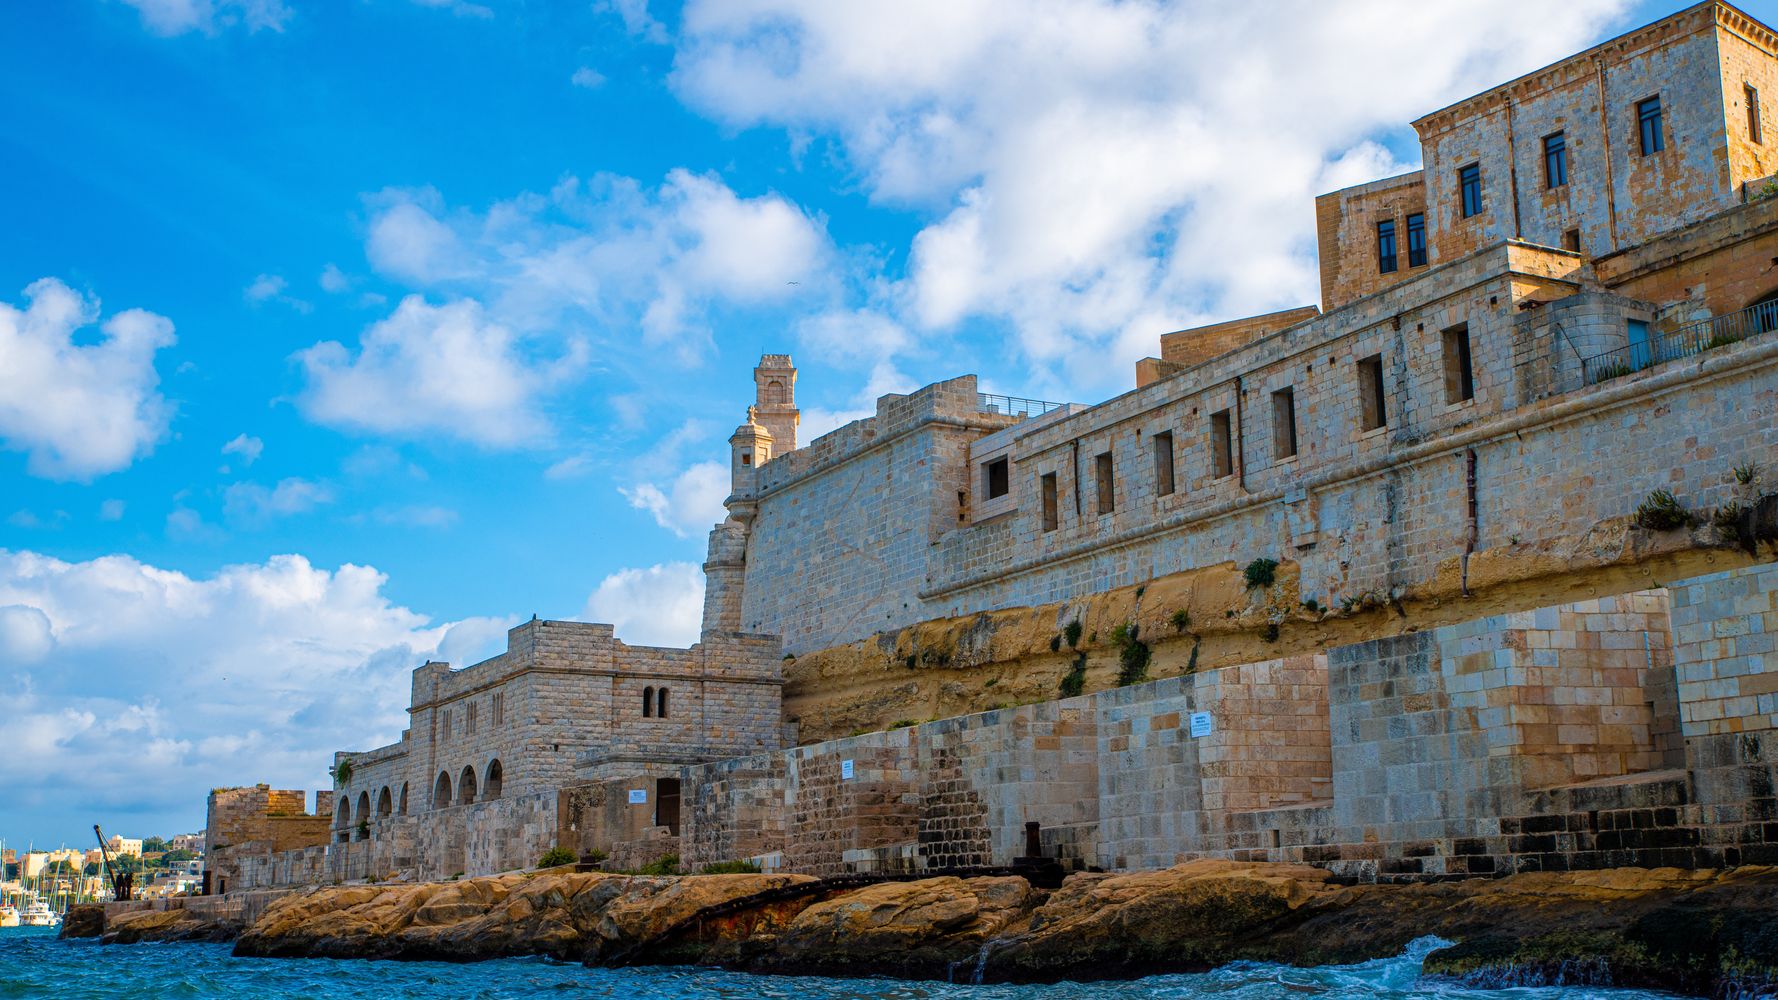 Woman Who Had Miscarriage On Malta Trip Can’t Get Abortion